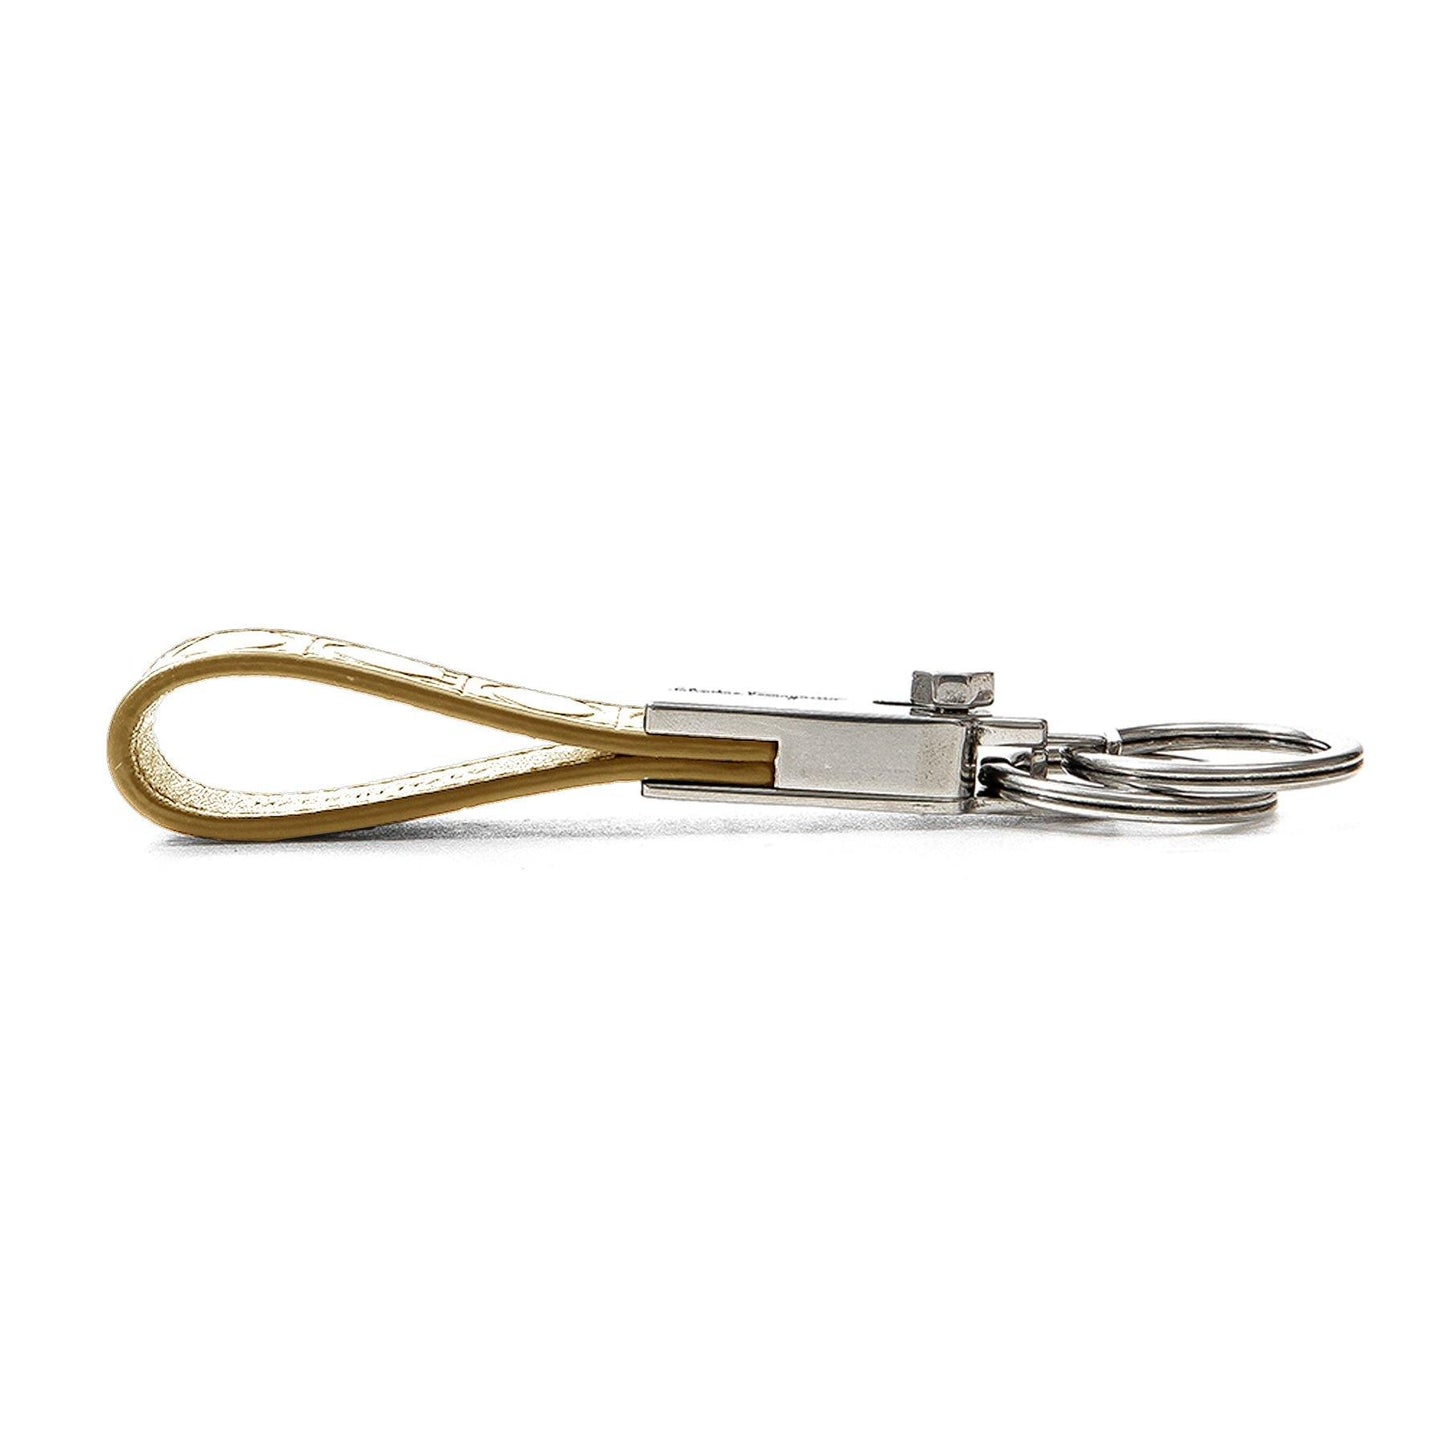 Gamma Valet Leather Key Chain - Cosmos Boutique New Jersey